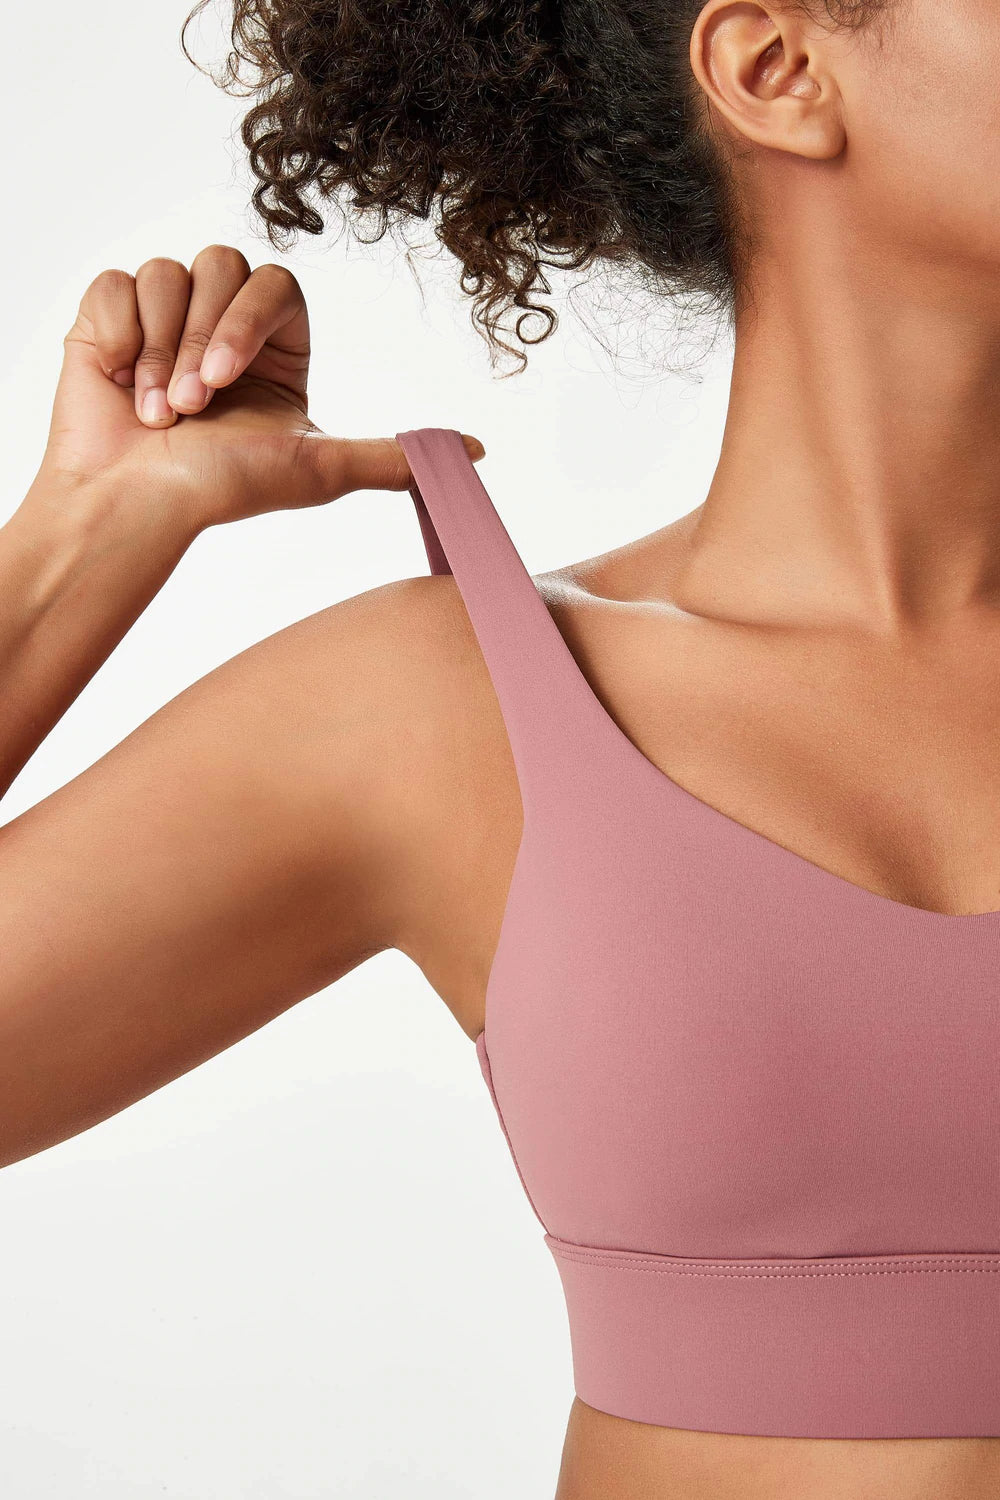 What is a High-Impact Sports Bra? – Kica Active